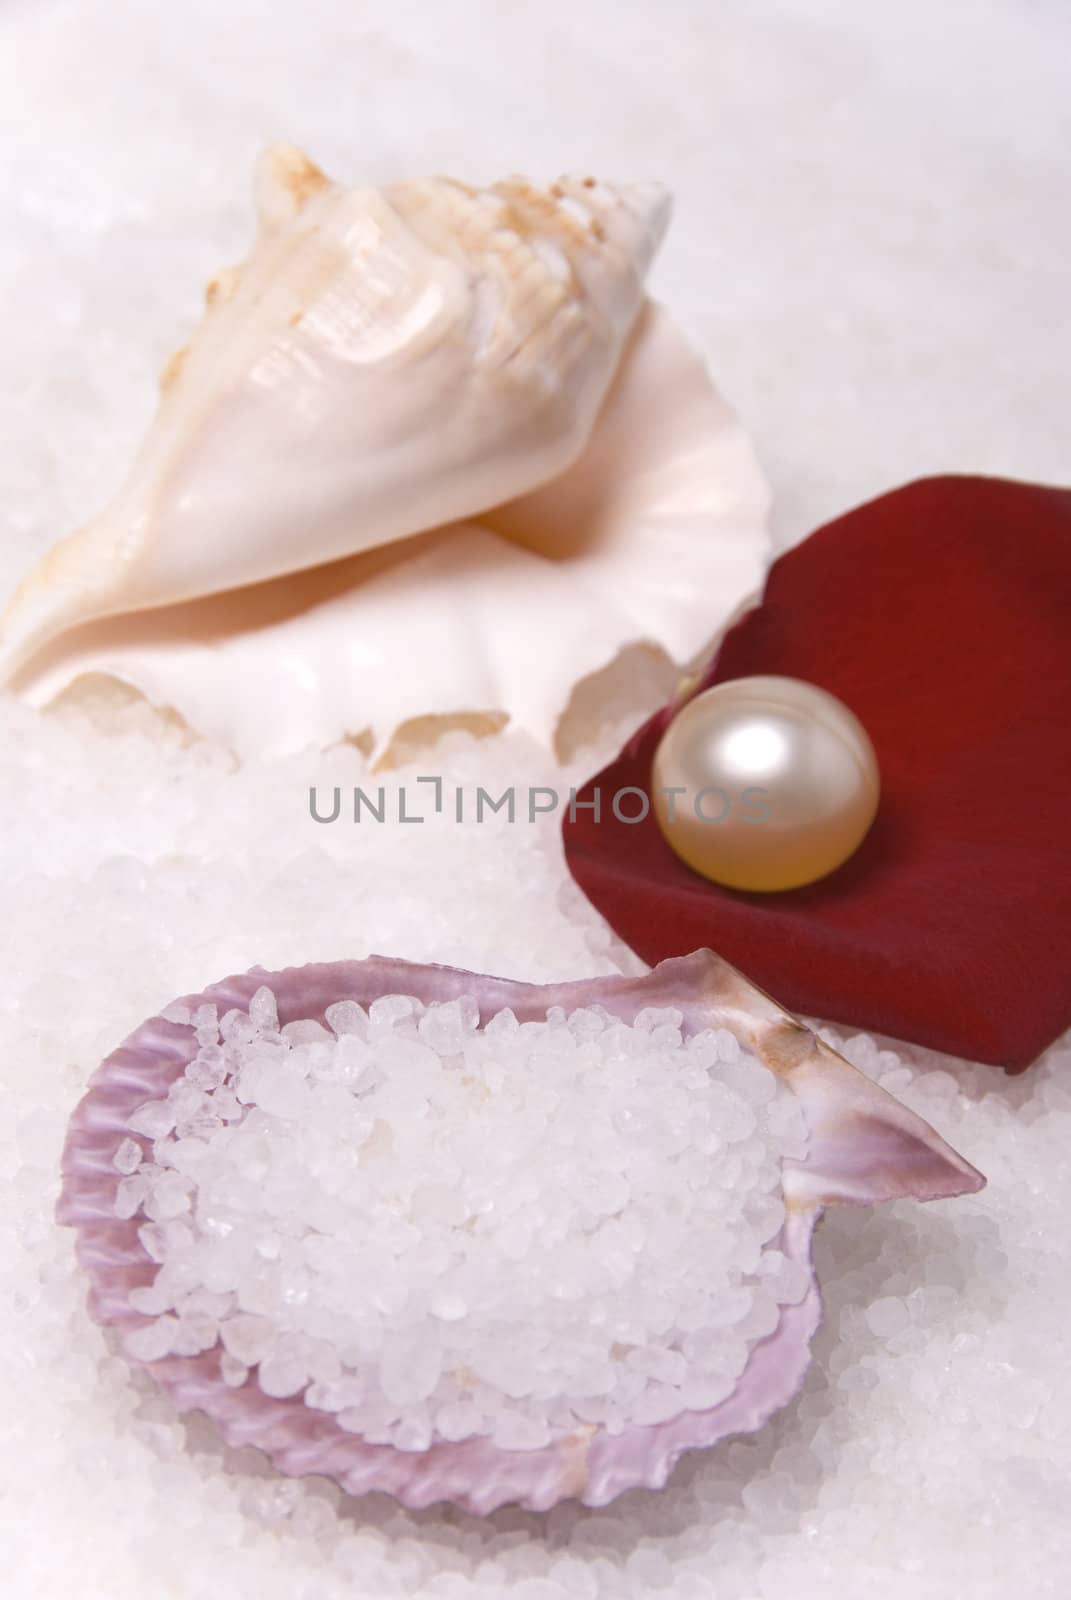 Items for bath oil pearl white salt mussels and red rose petal 